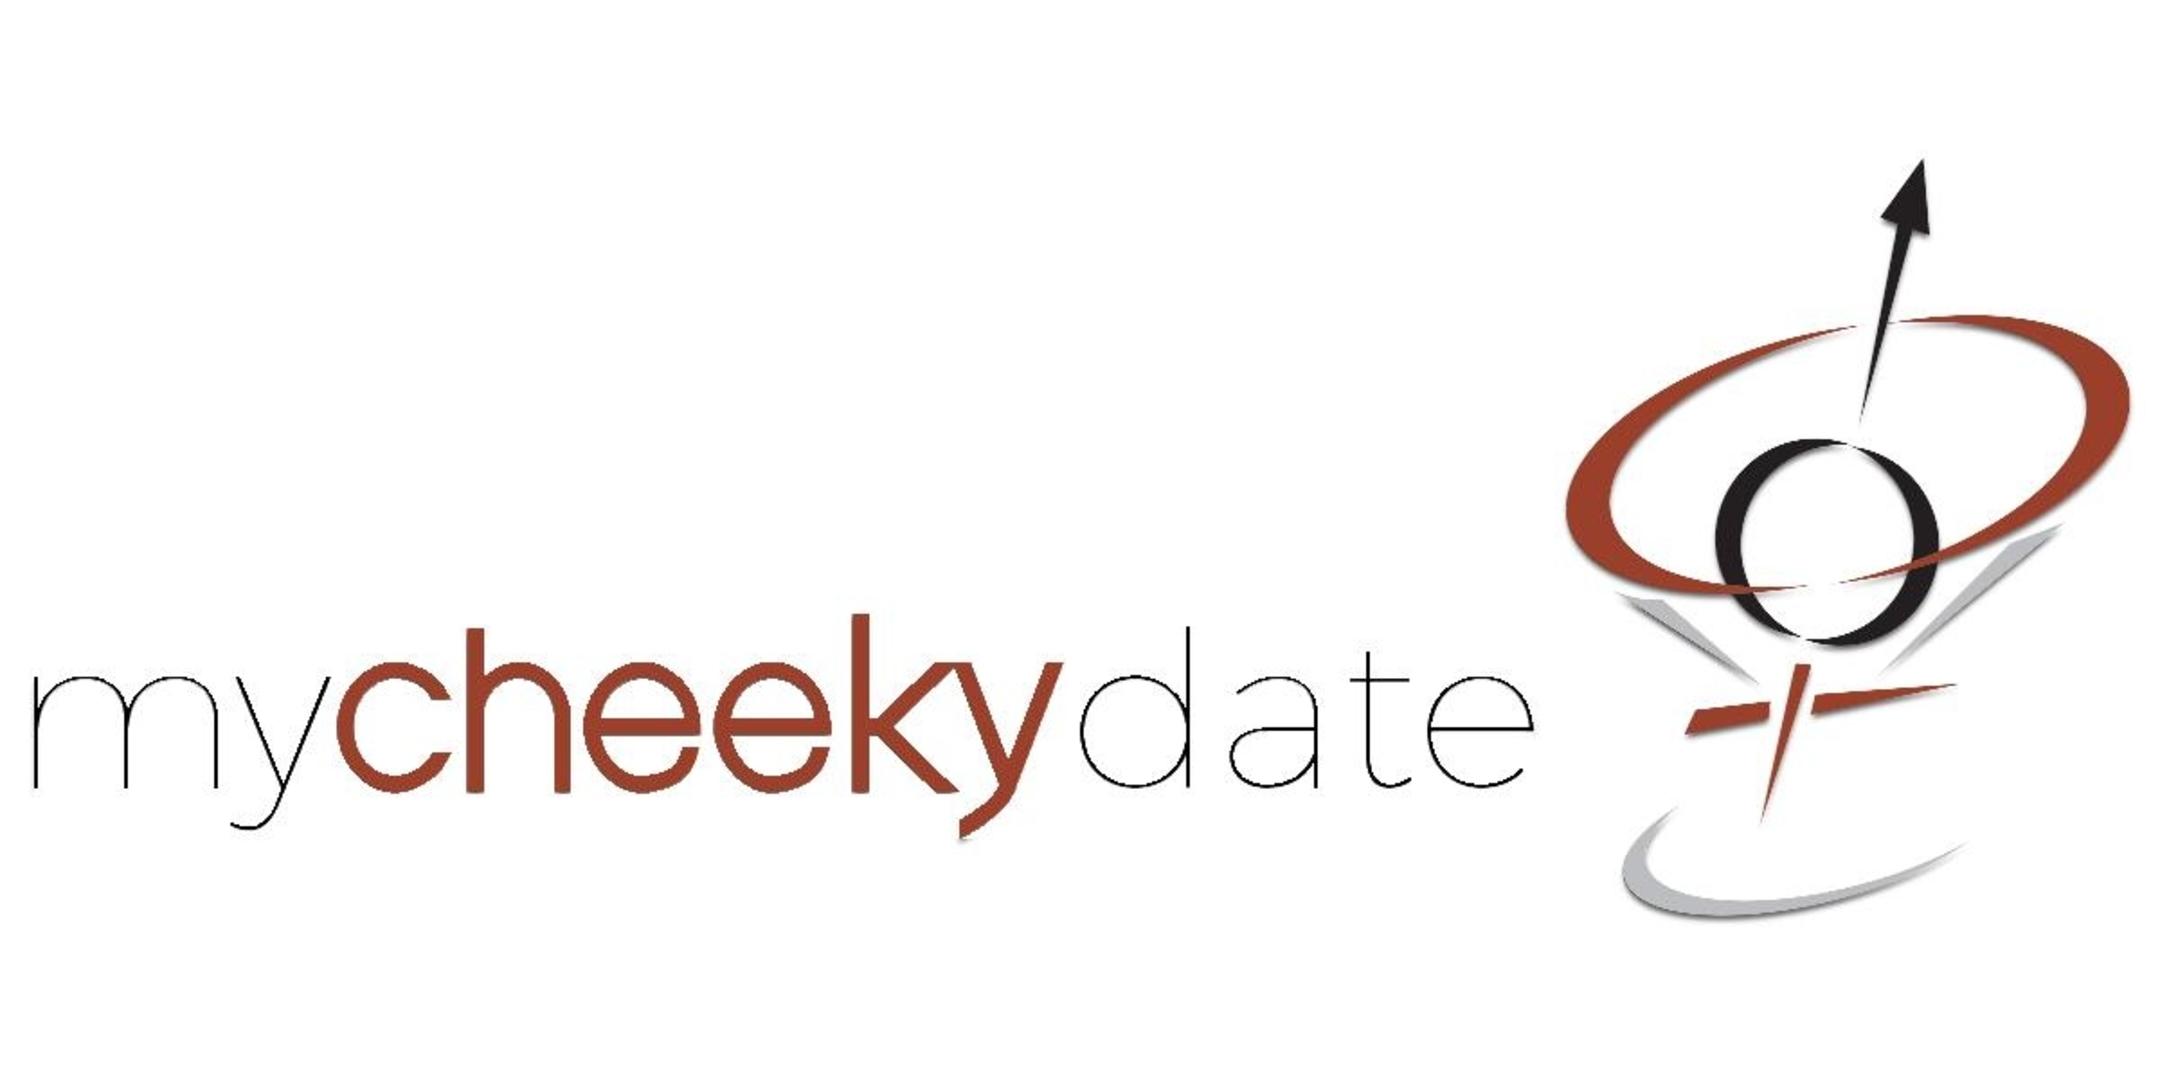 Saturday Speed Dating in LA | Ages 24-38 | Singles Event | Los Angeles | let's Get Cheeky!